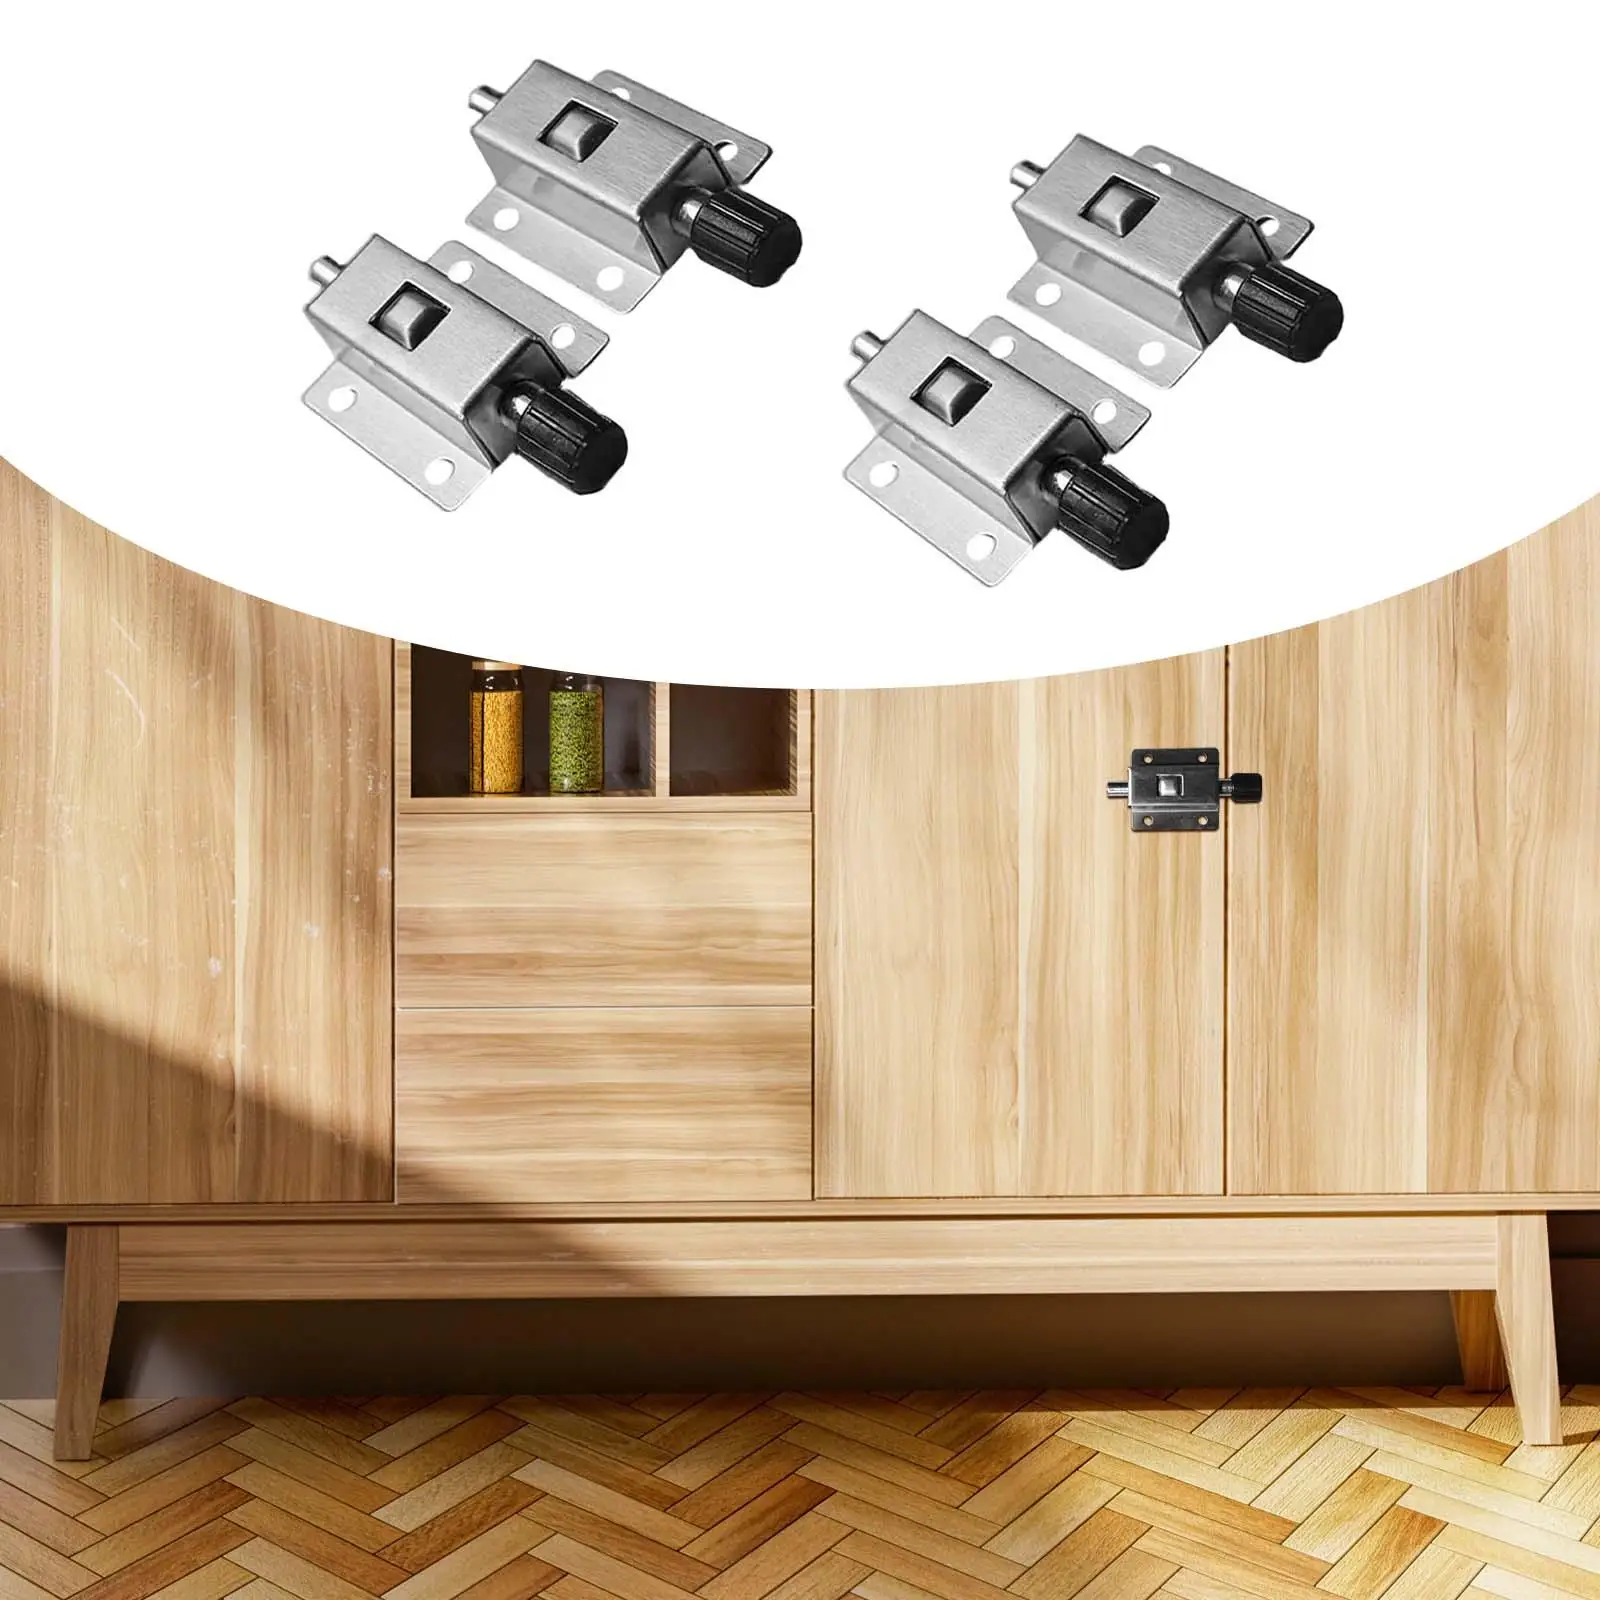 4x Door Latch Bolts, Window Locks, Gate Lock Press Buttons, Spring Loaded Latch Automatic for , Garden Doors,Motor Home